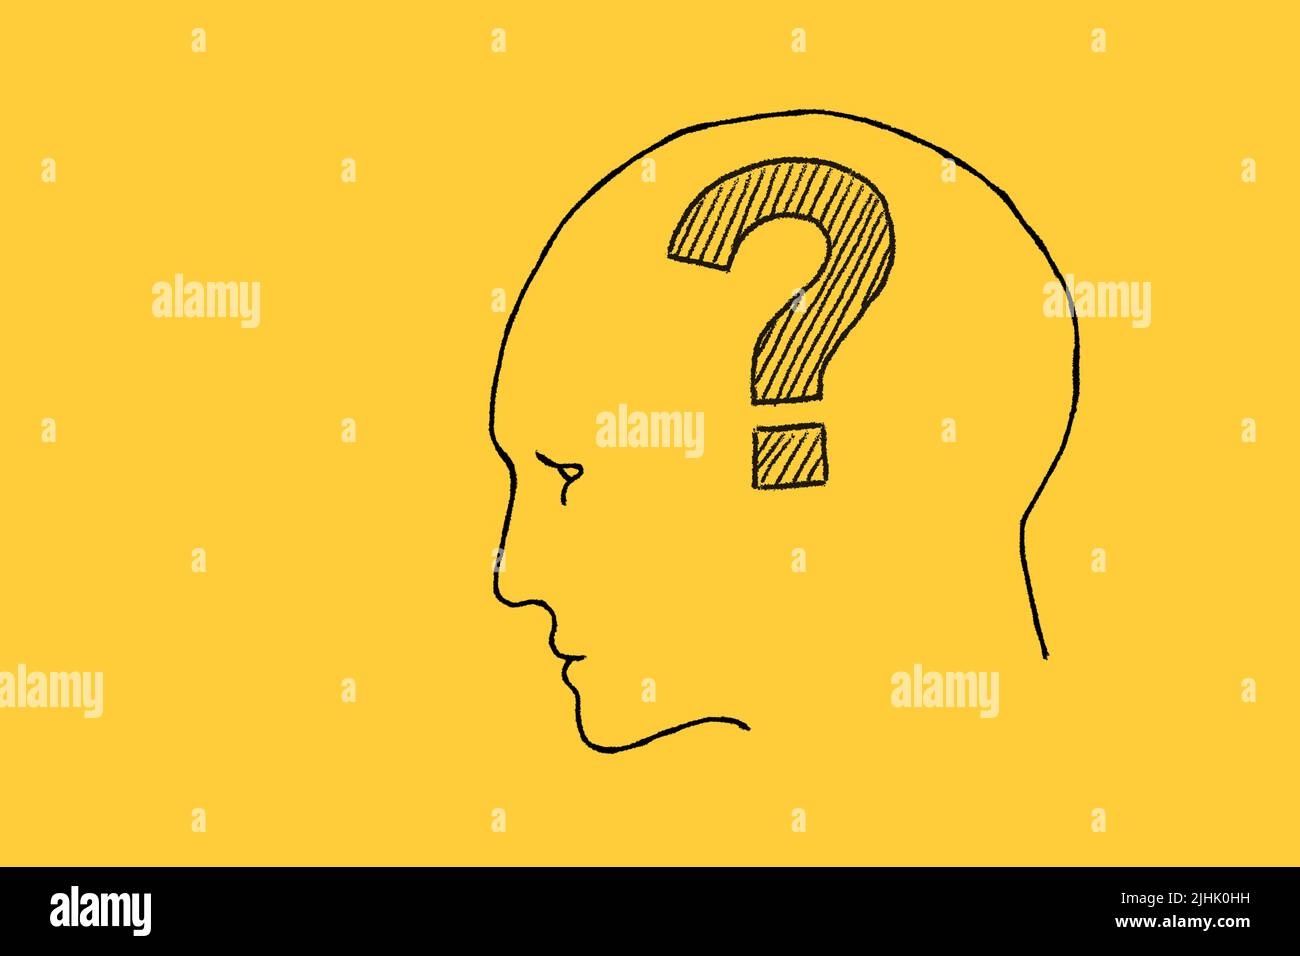 Human face with question mark inside. Illustration on yellow background. Stock Photo